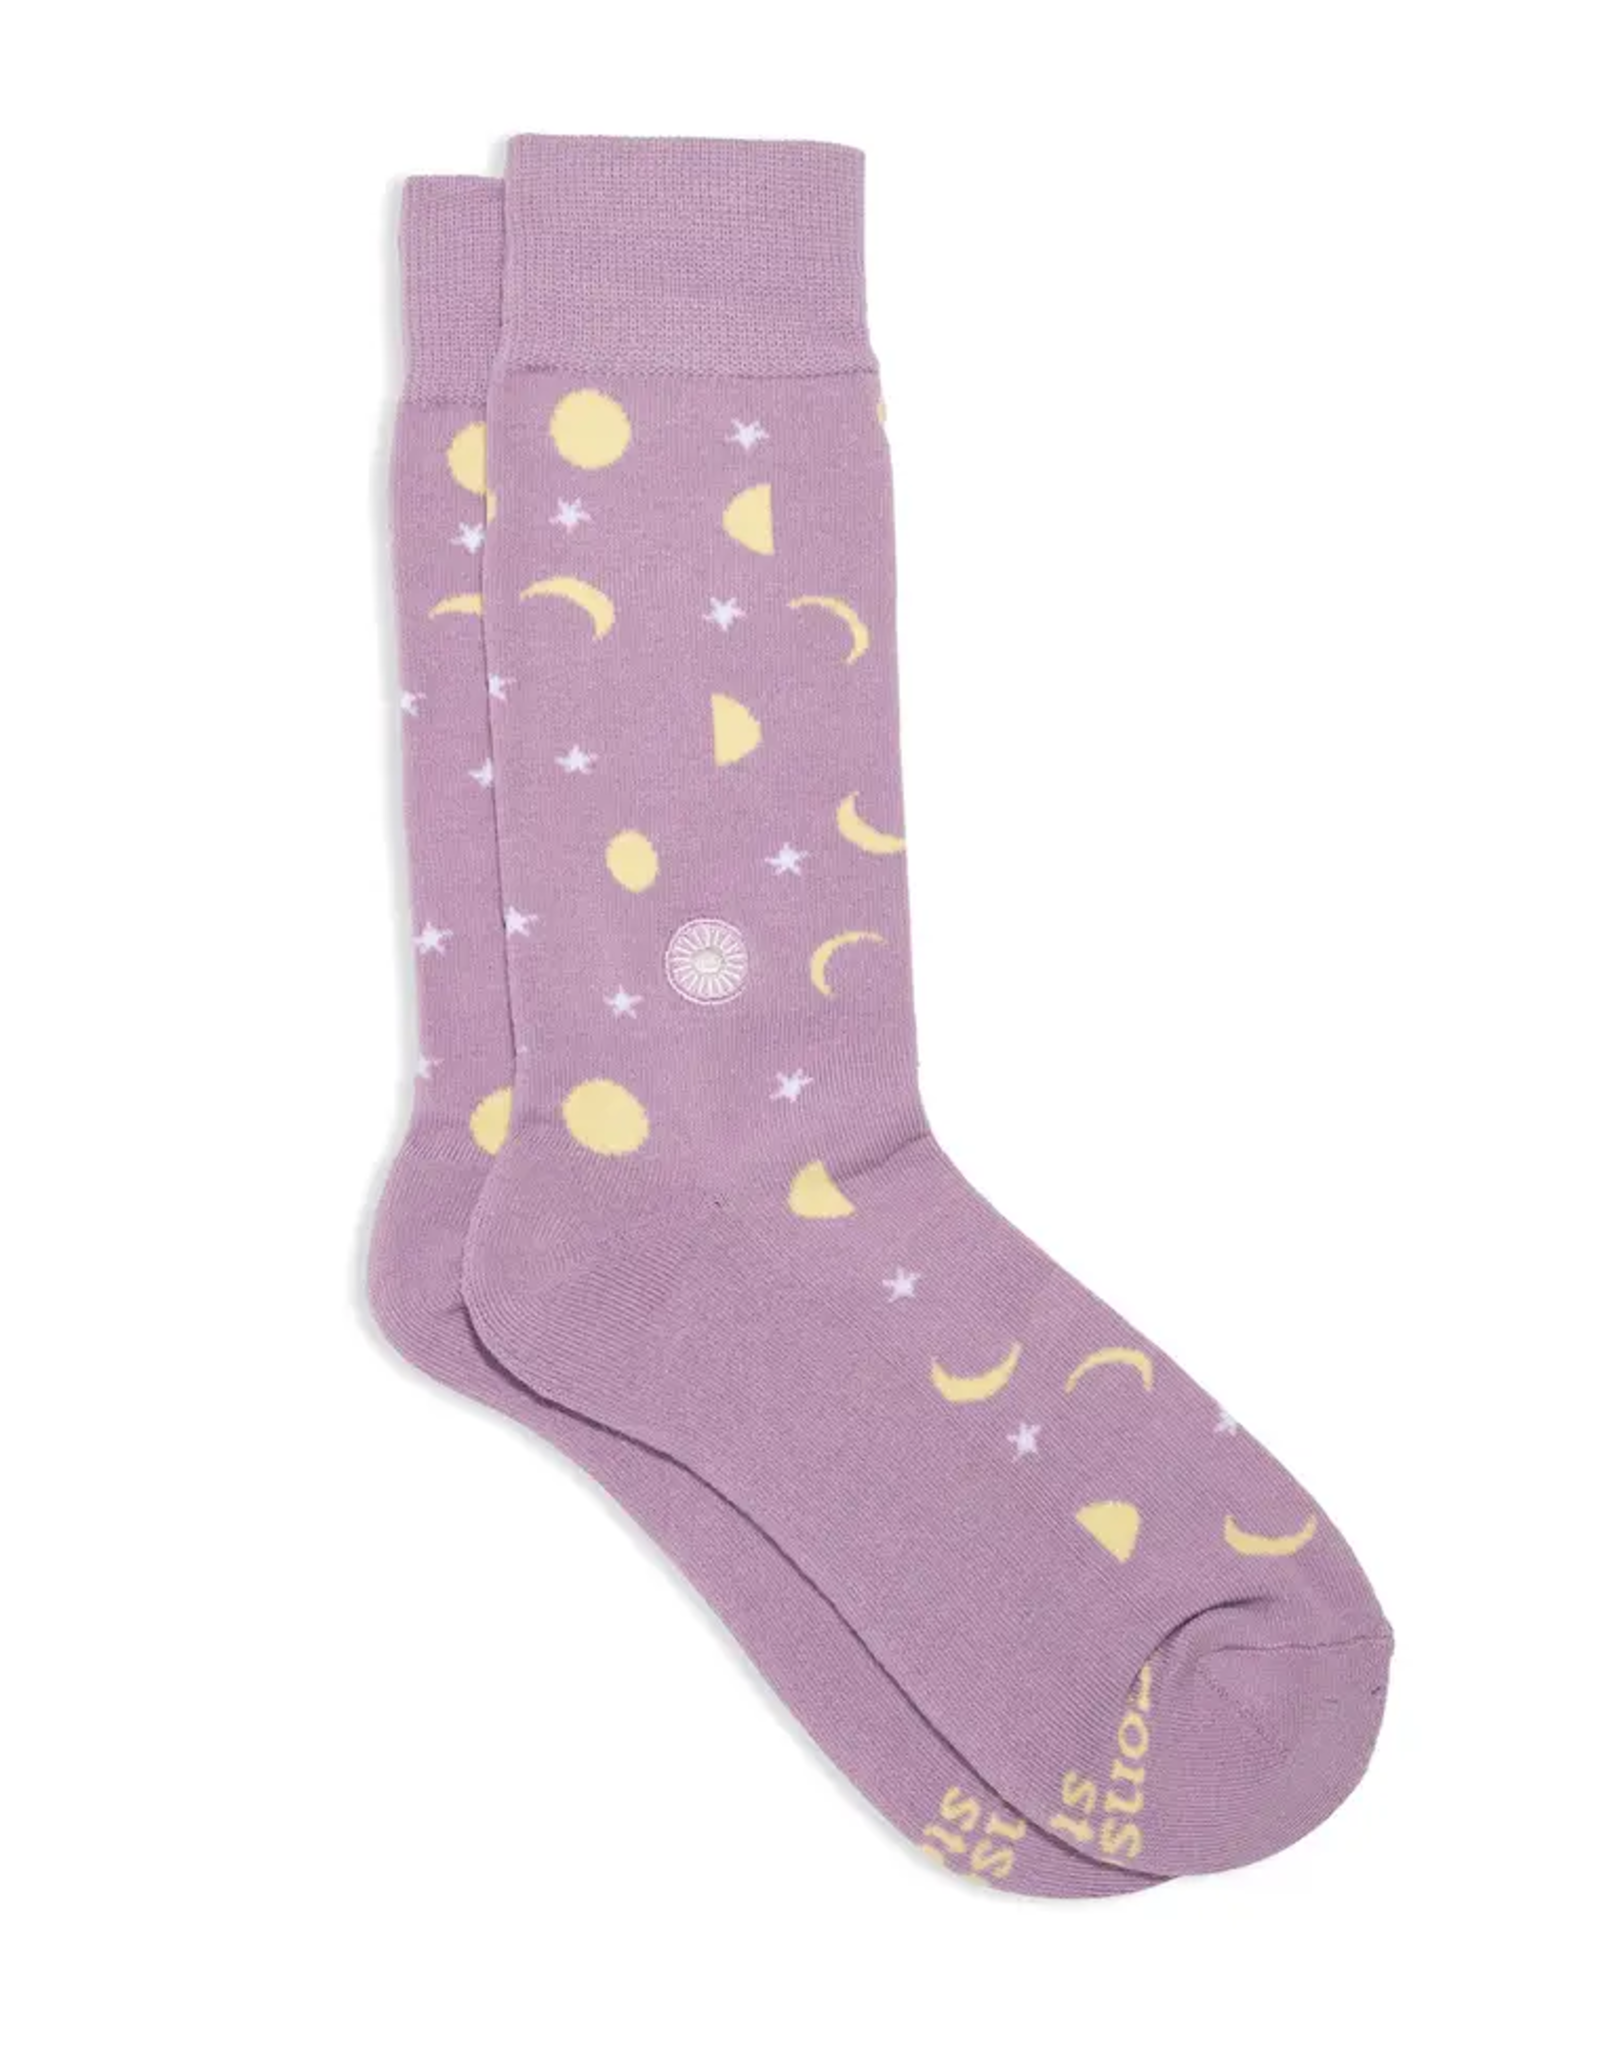 Socks That Support Mental Health (Purple Moons), India